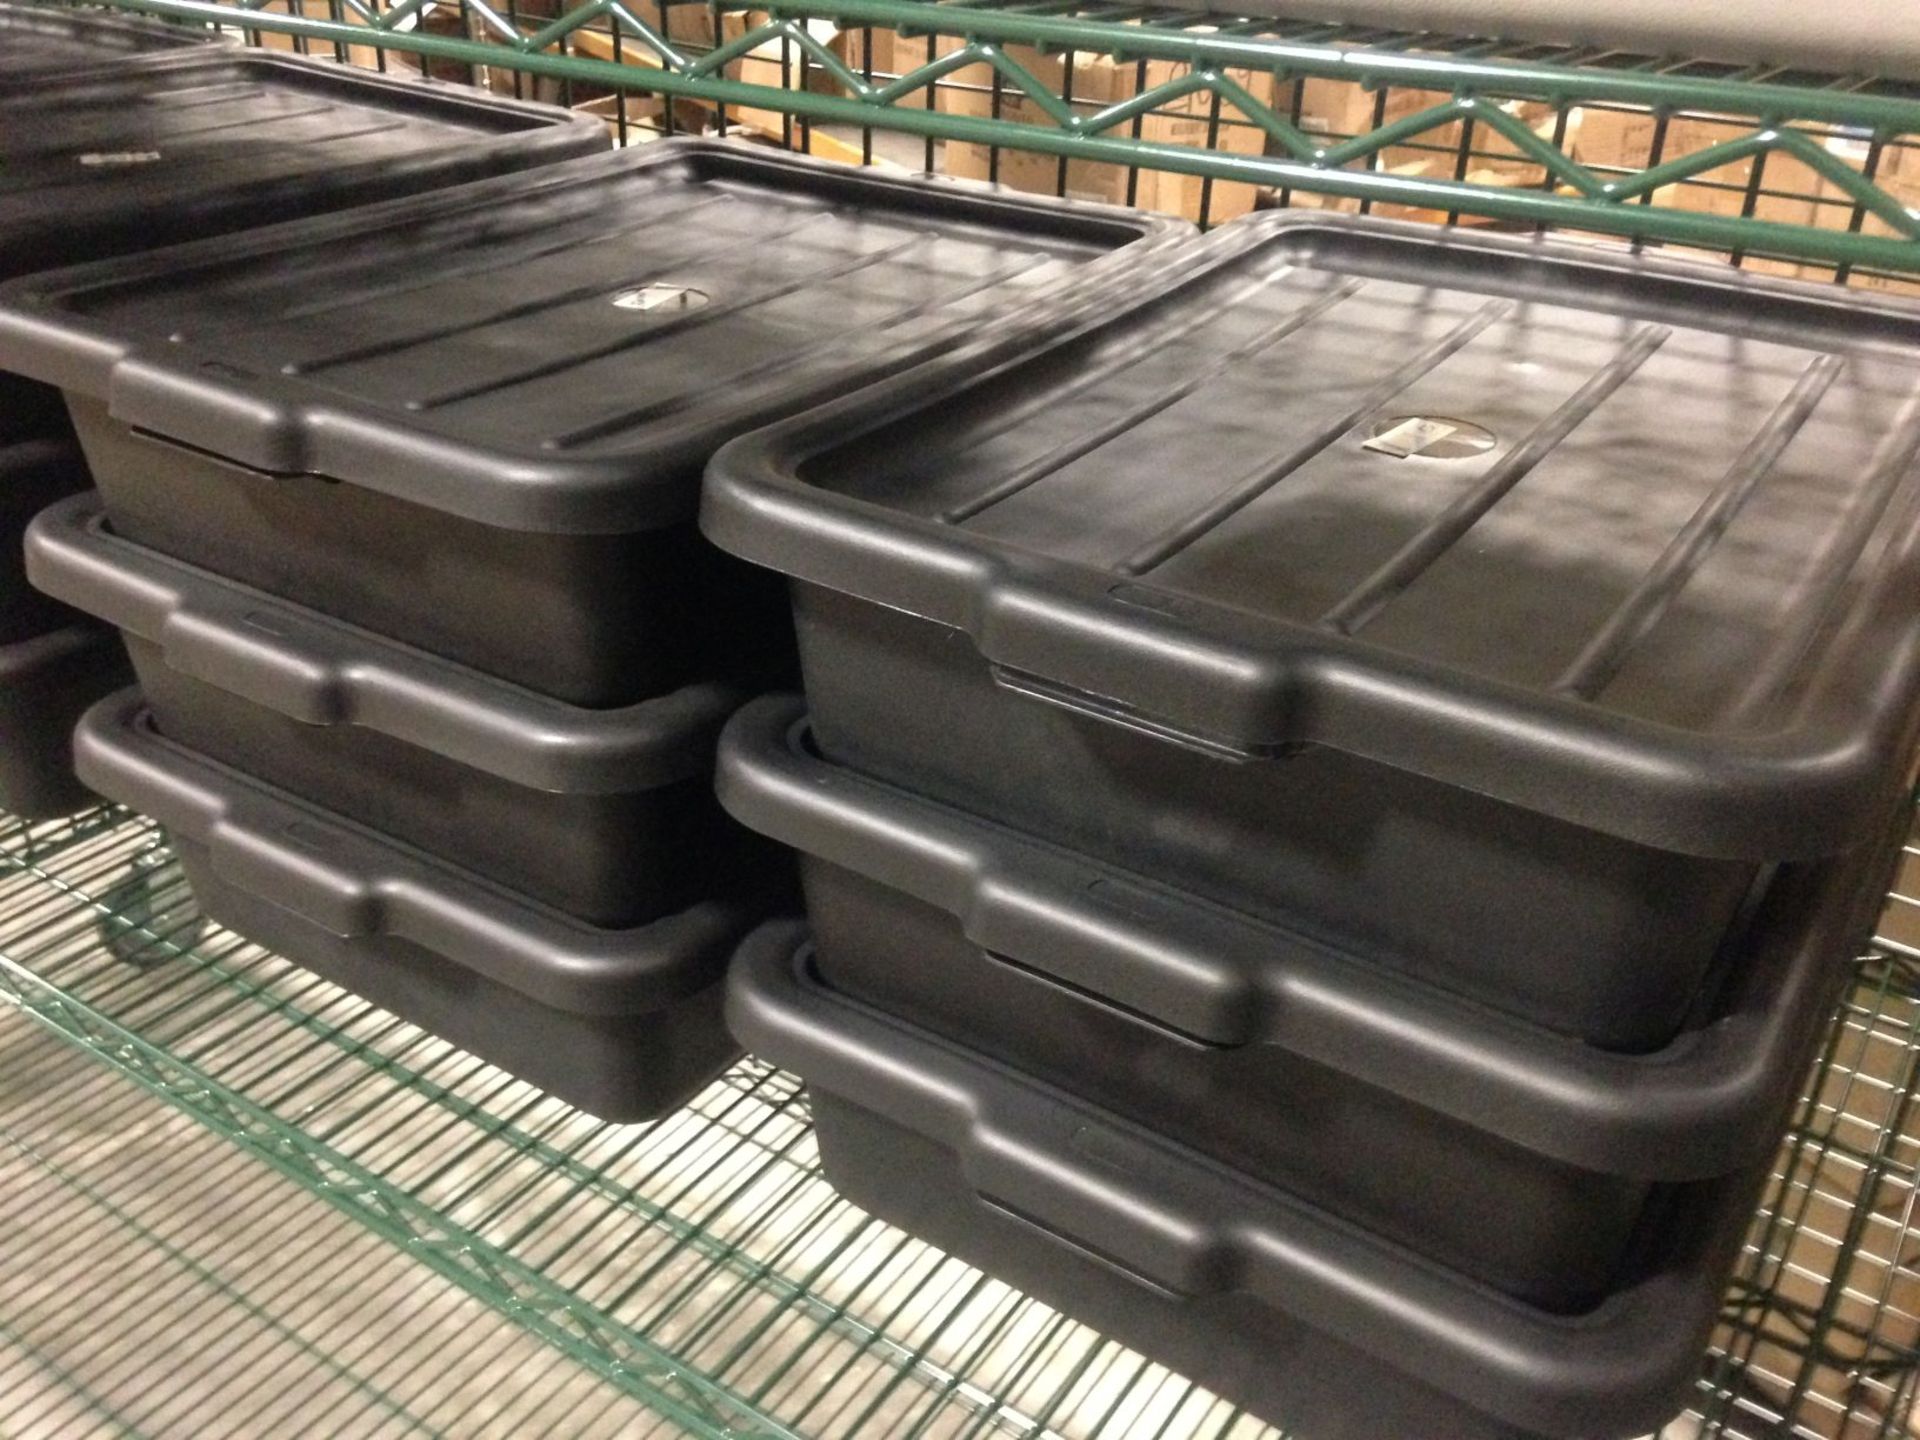 5" Depth Black Totes with Lids - Lot of 6